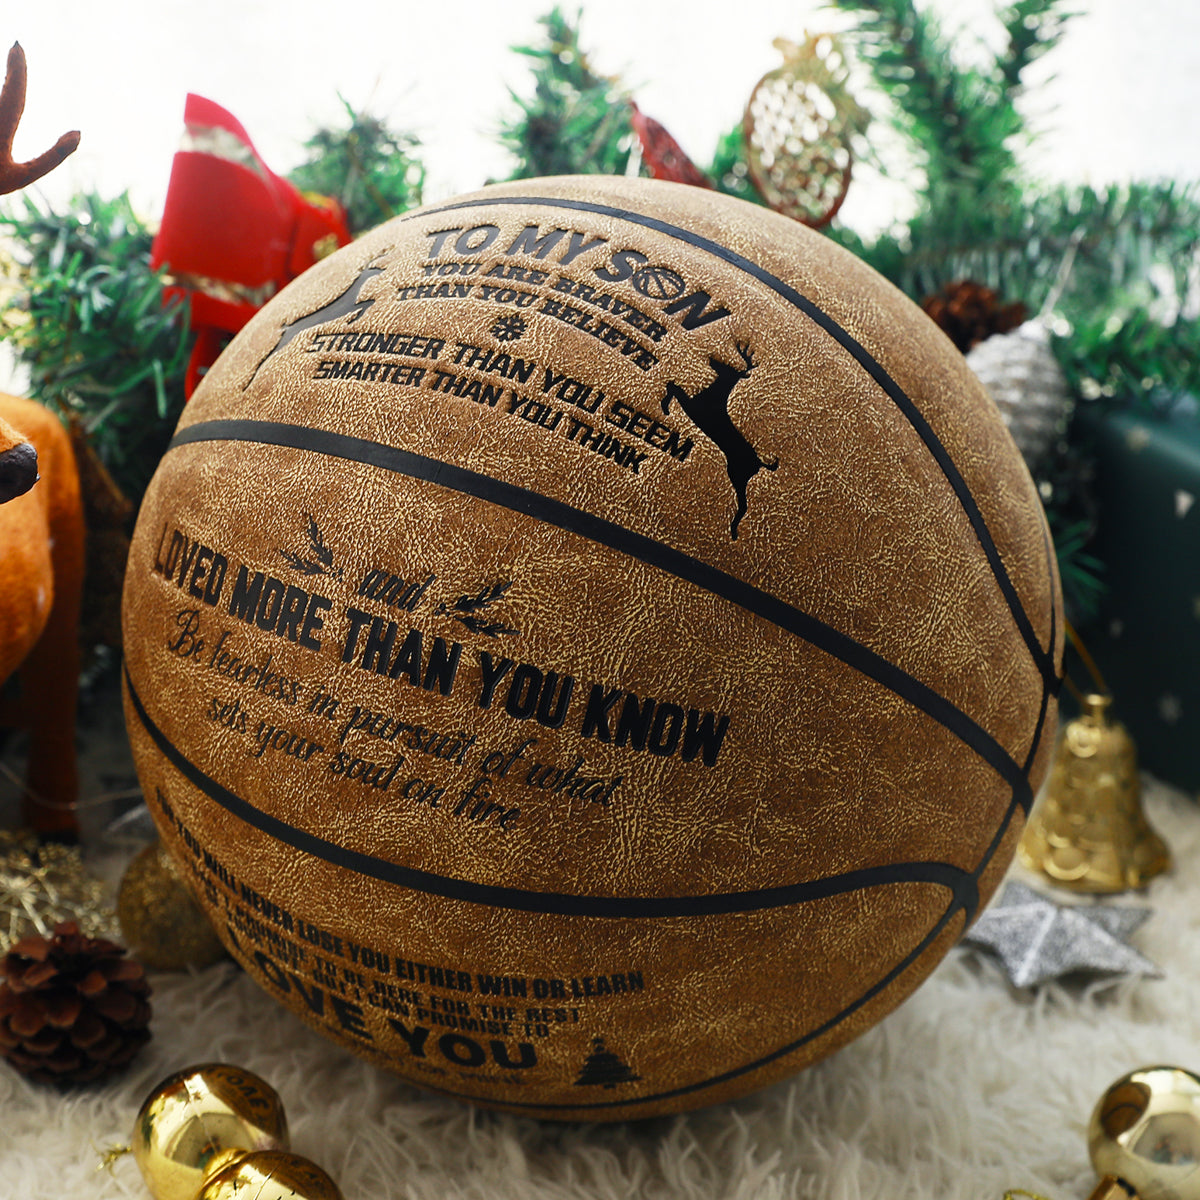 Personalized Letter Basketball For Son, Basketball Indoor/Outdoor Game Ball For Boy, Birthday Christmas Gift For Son, Christmas